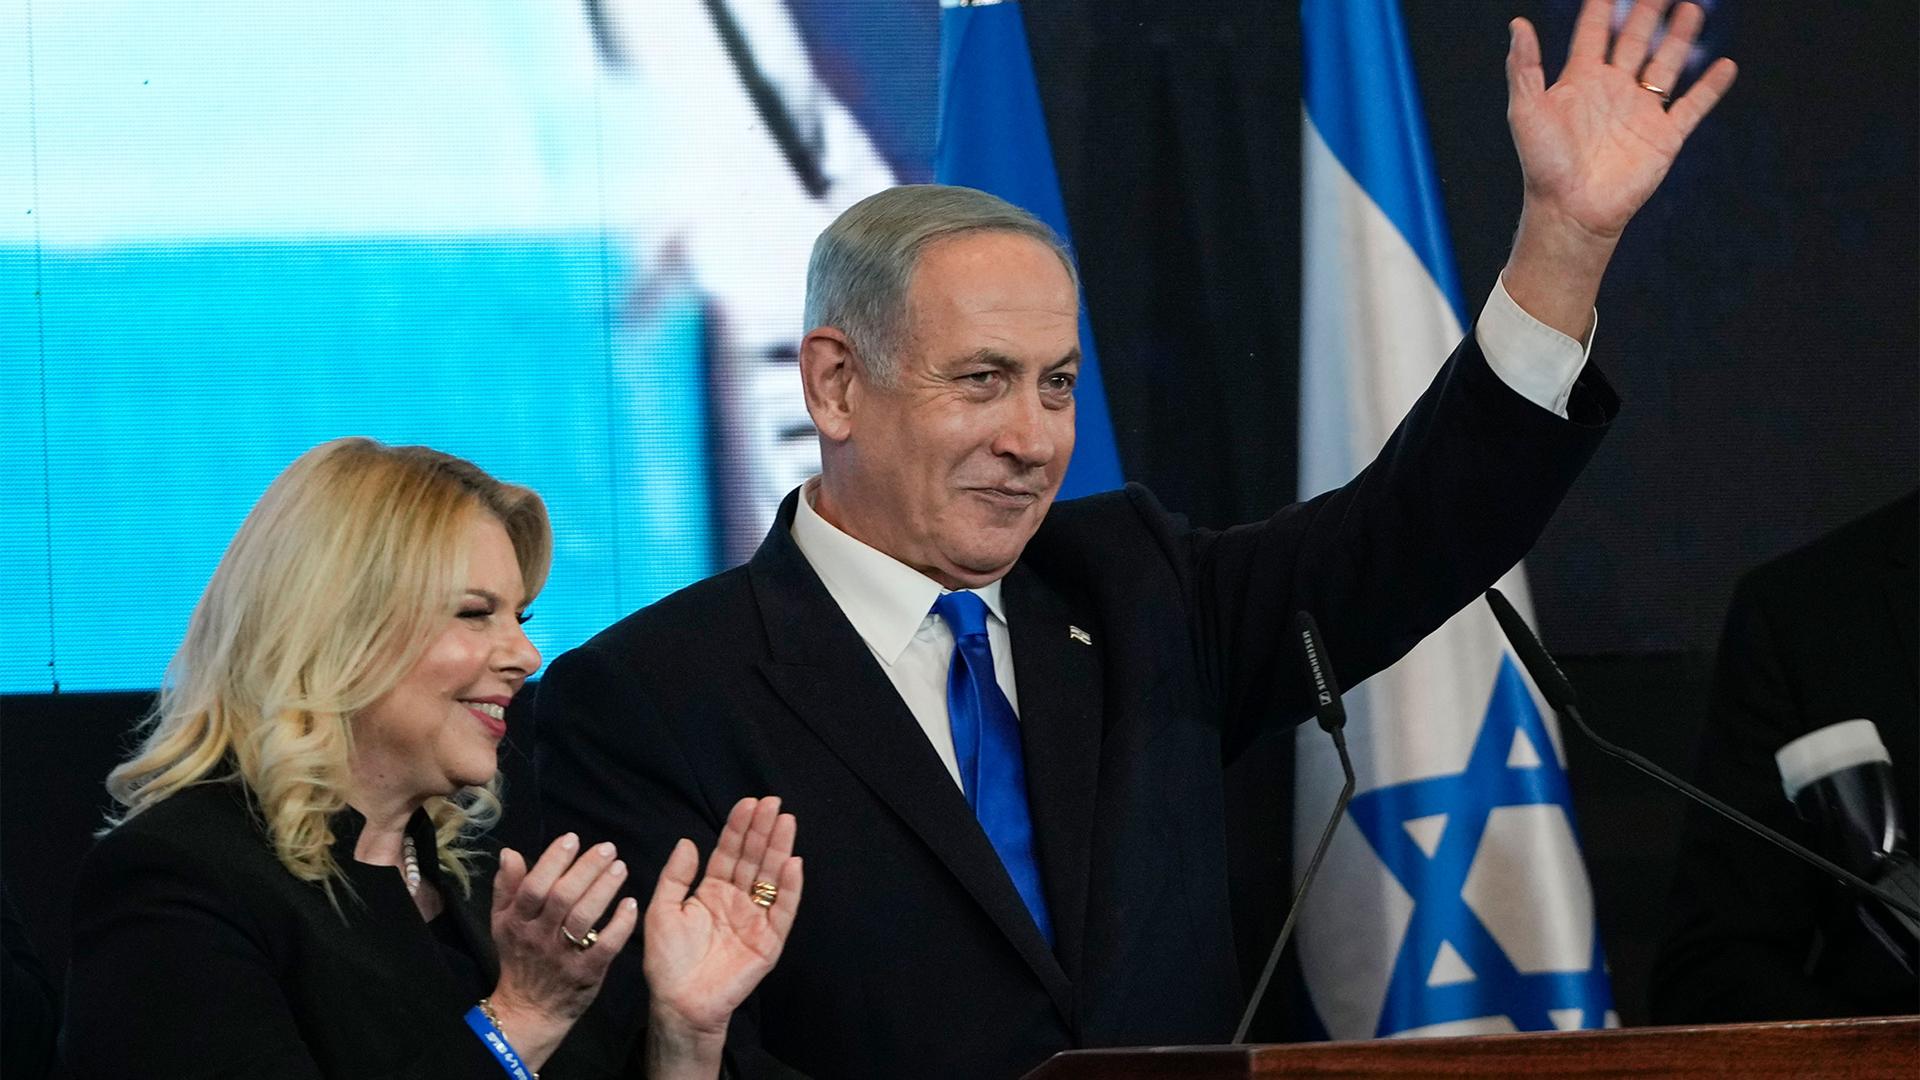 Benjamin Netanyahu, accompanied by his wife Sara, waves to his supporters after first exit poll results for the Israeli Parliamentary election at his party's headquarters in Jerusalem